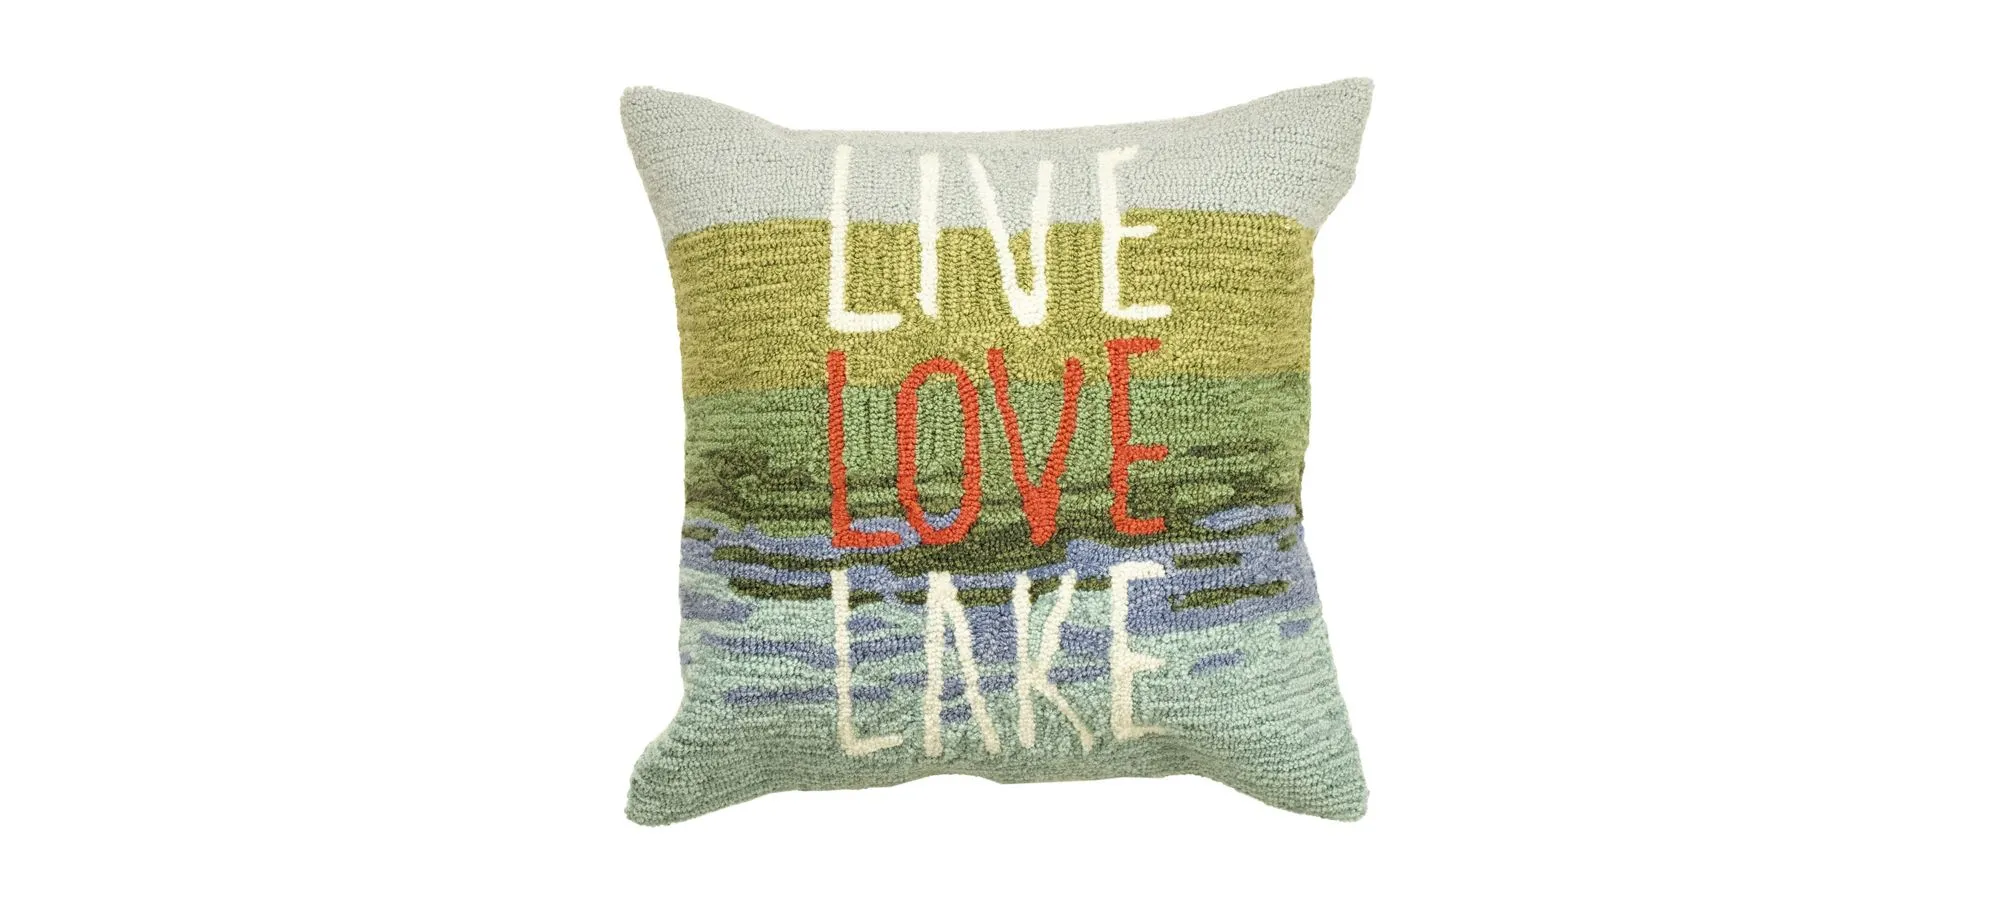 Liora Manne Frontporch Live Love Lake Pillow in Blue by Trans-Ocean Import Co Inc